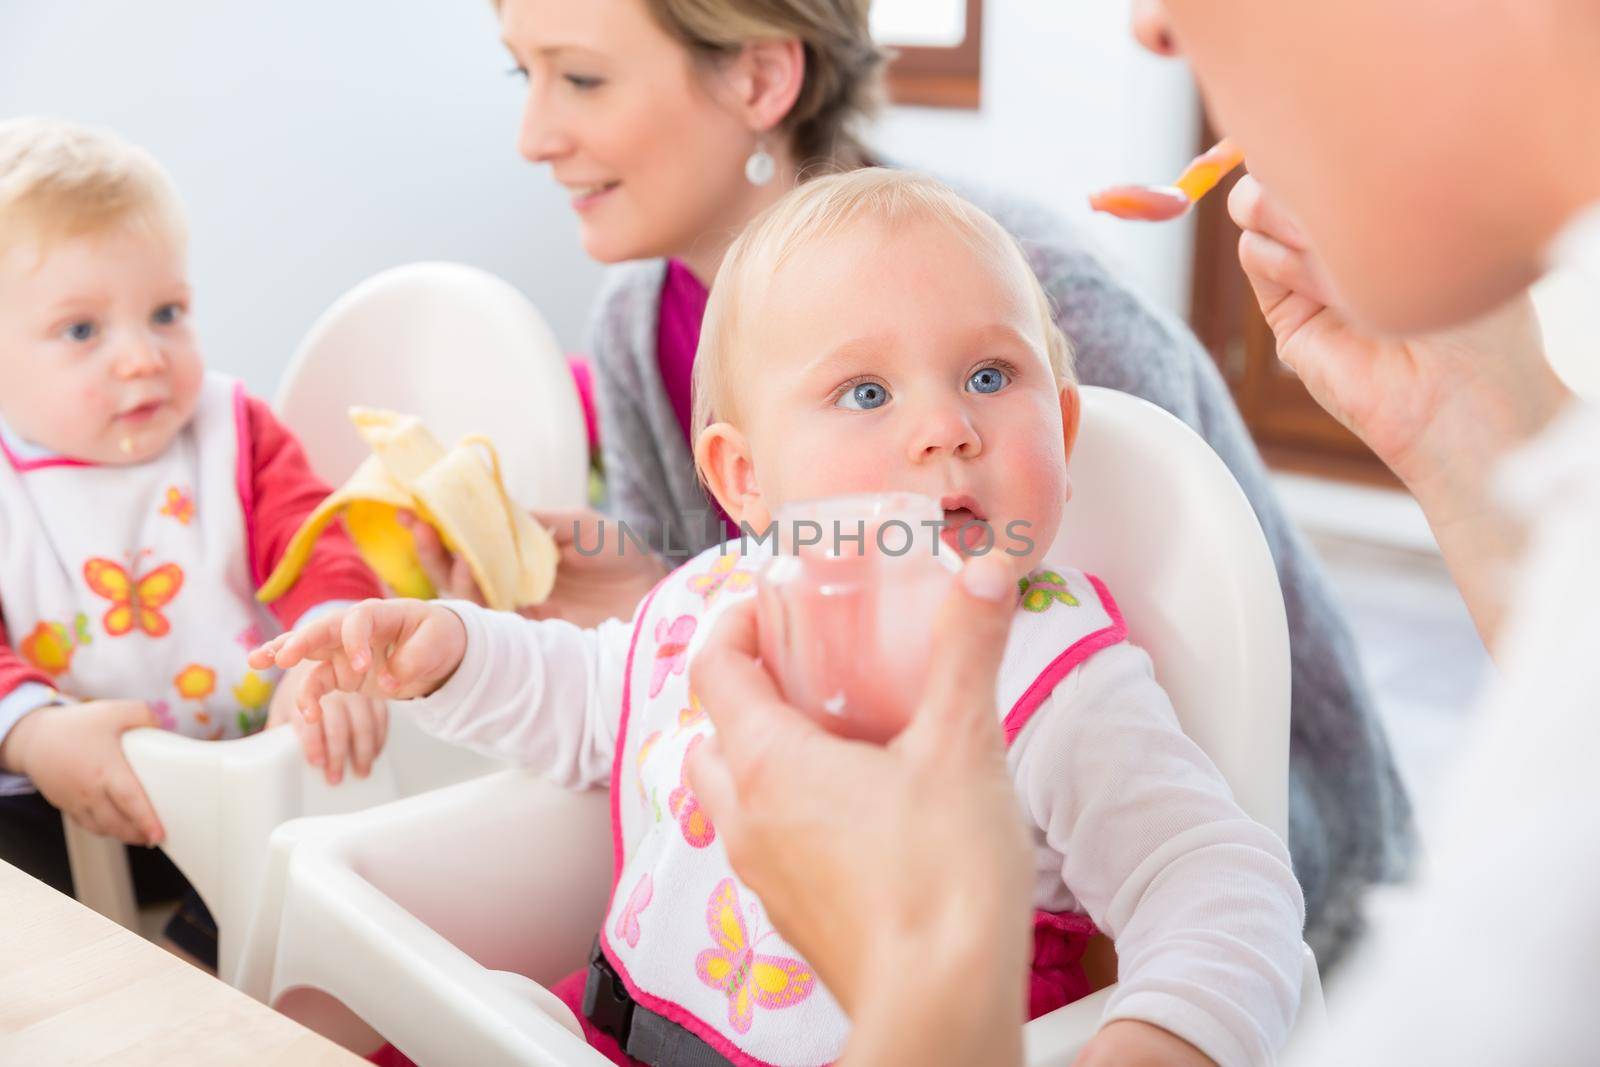 Portrait of a cute and healthy baby girl with blue eyes looking at her mother by Kzenon